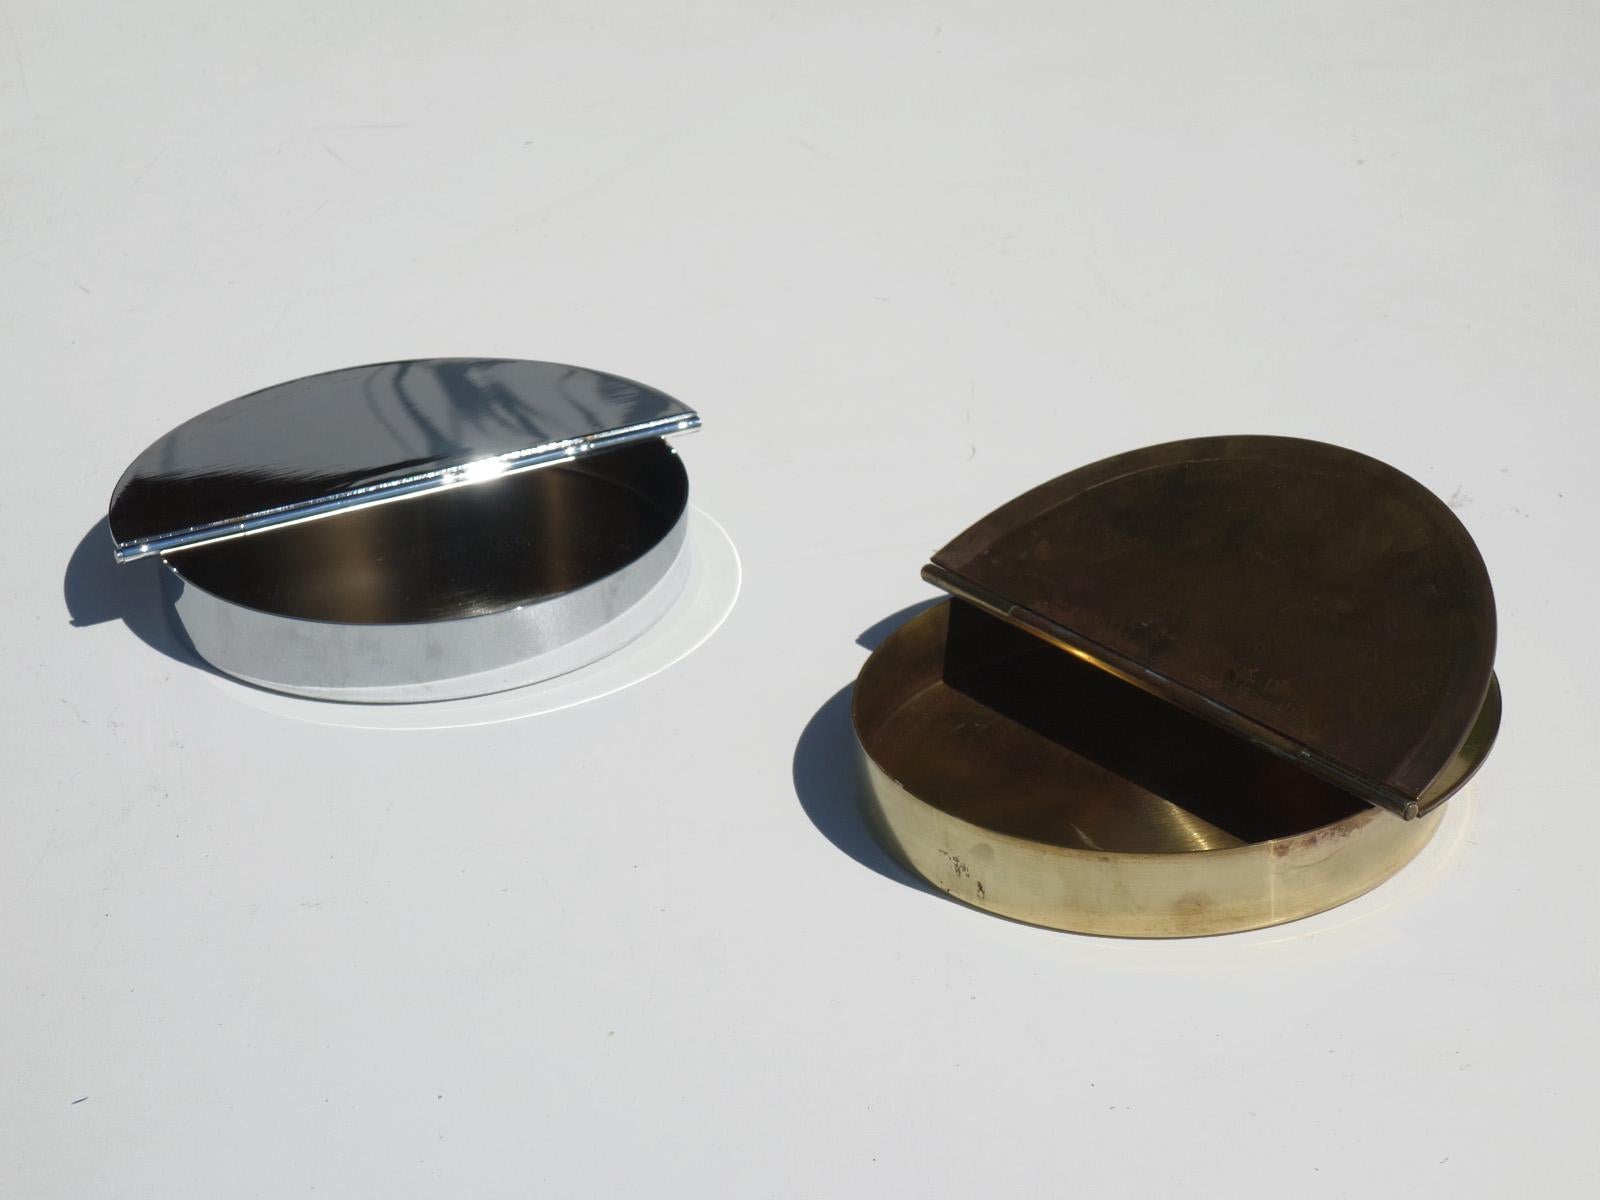 Ashtray in chrome-plated brass and polish brass, hinged cover
Perfect condition.